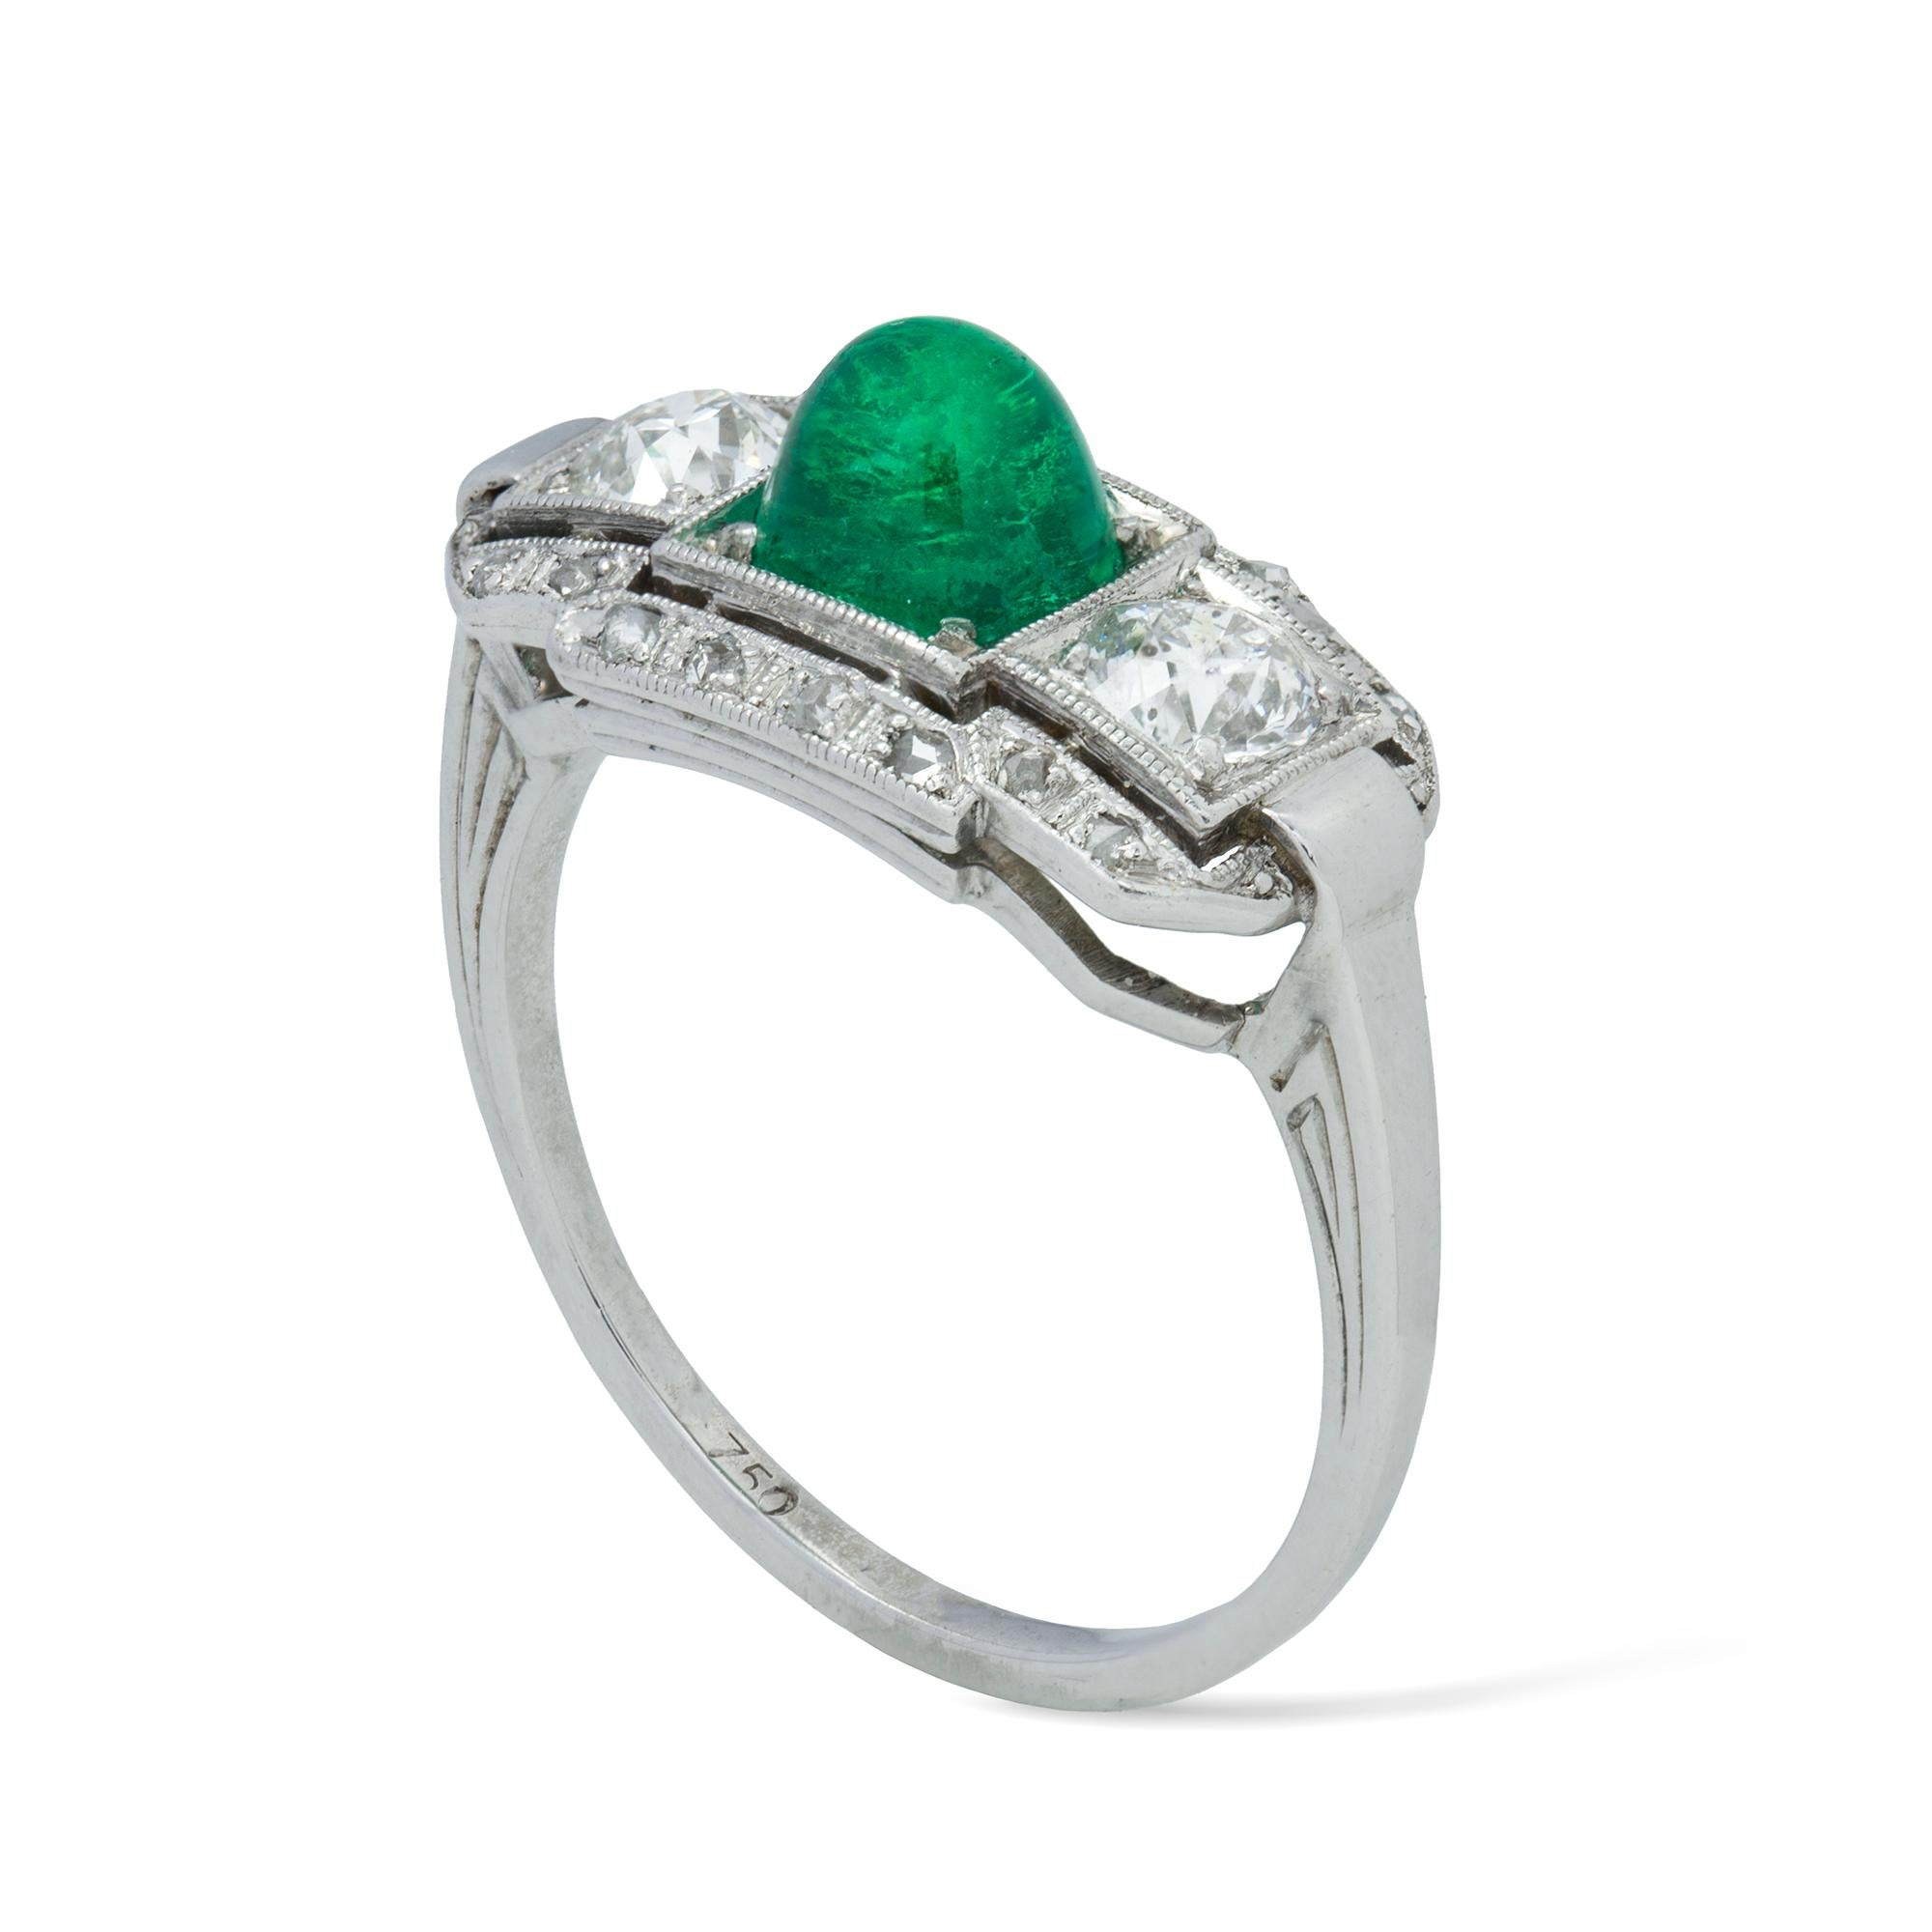 An Art Deco cabochon emerald and diamond ring, the central cabochon cut emerald estimated to weigh 0.80 carats flanked by two old brilliant-cut diamonds, surrounded by a row of small rose cut diamonds with a daylight in between estimated to weigh a